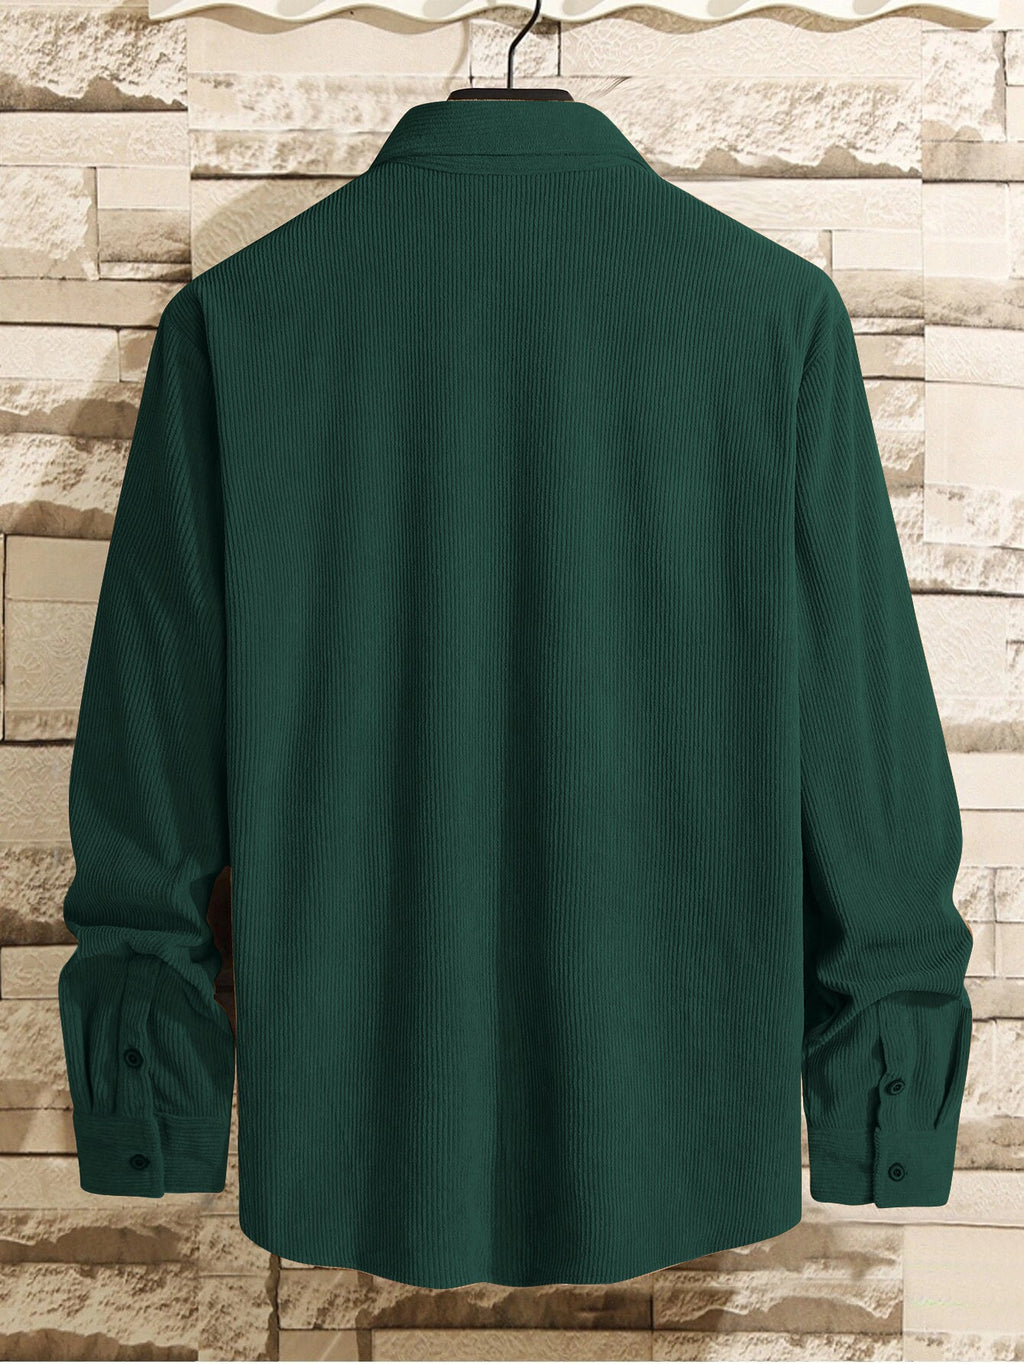 Charming Green Men Corduroy Solid Shirt With Pocket